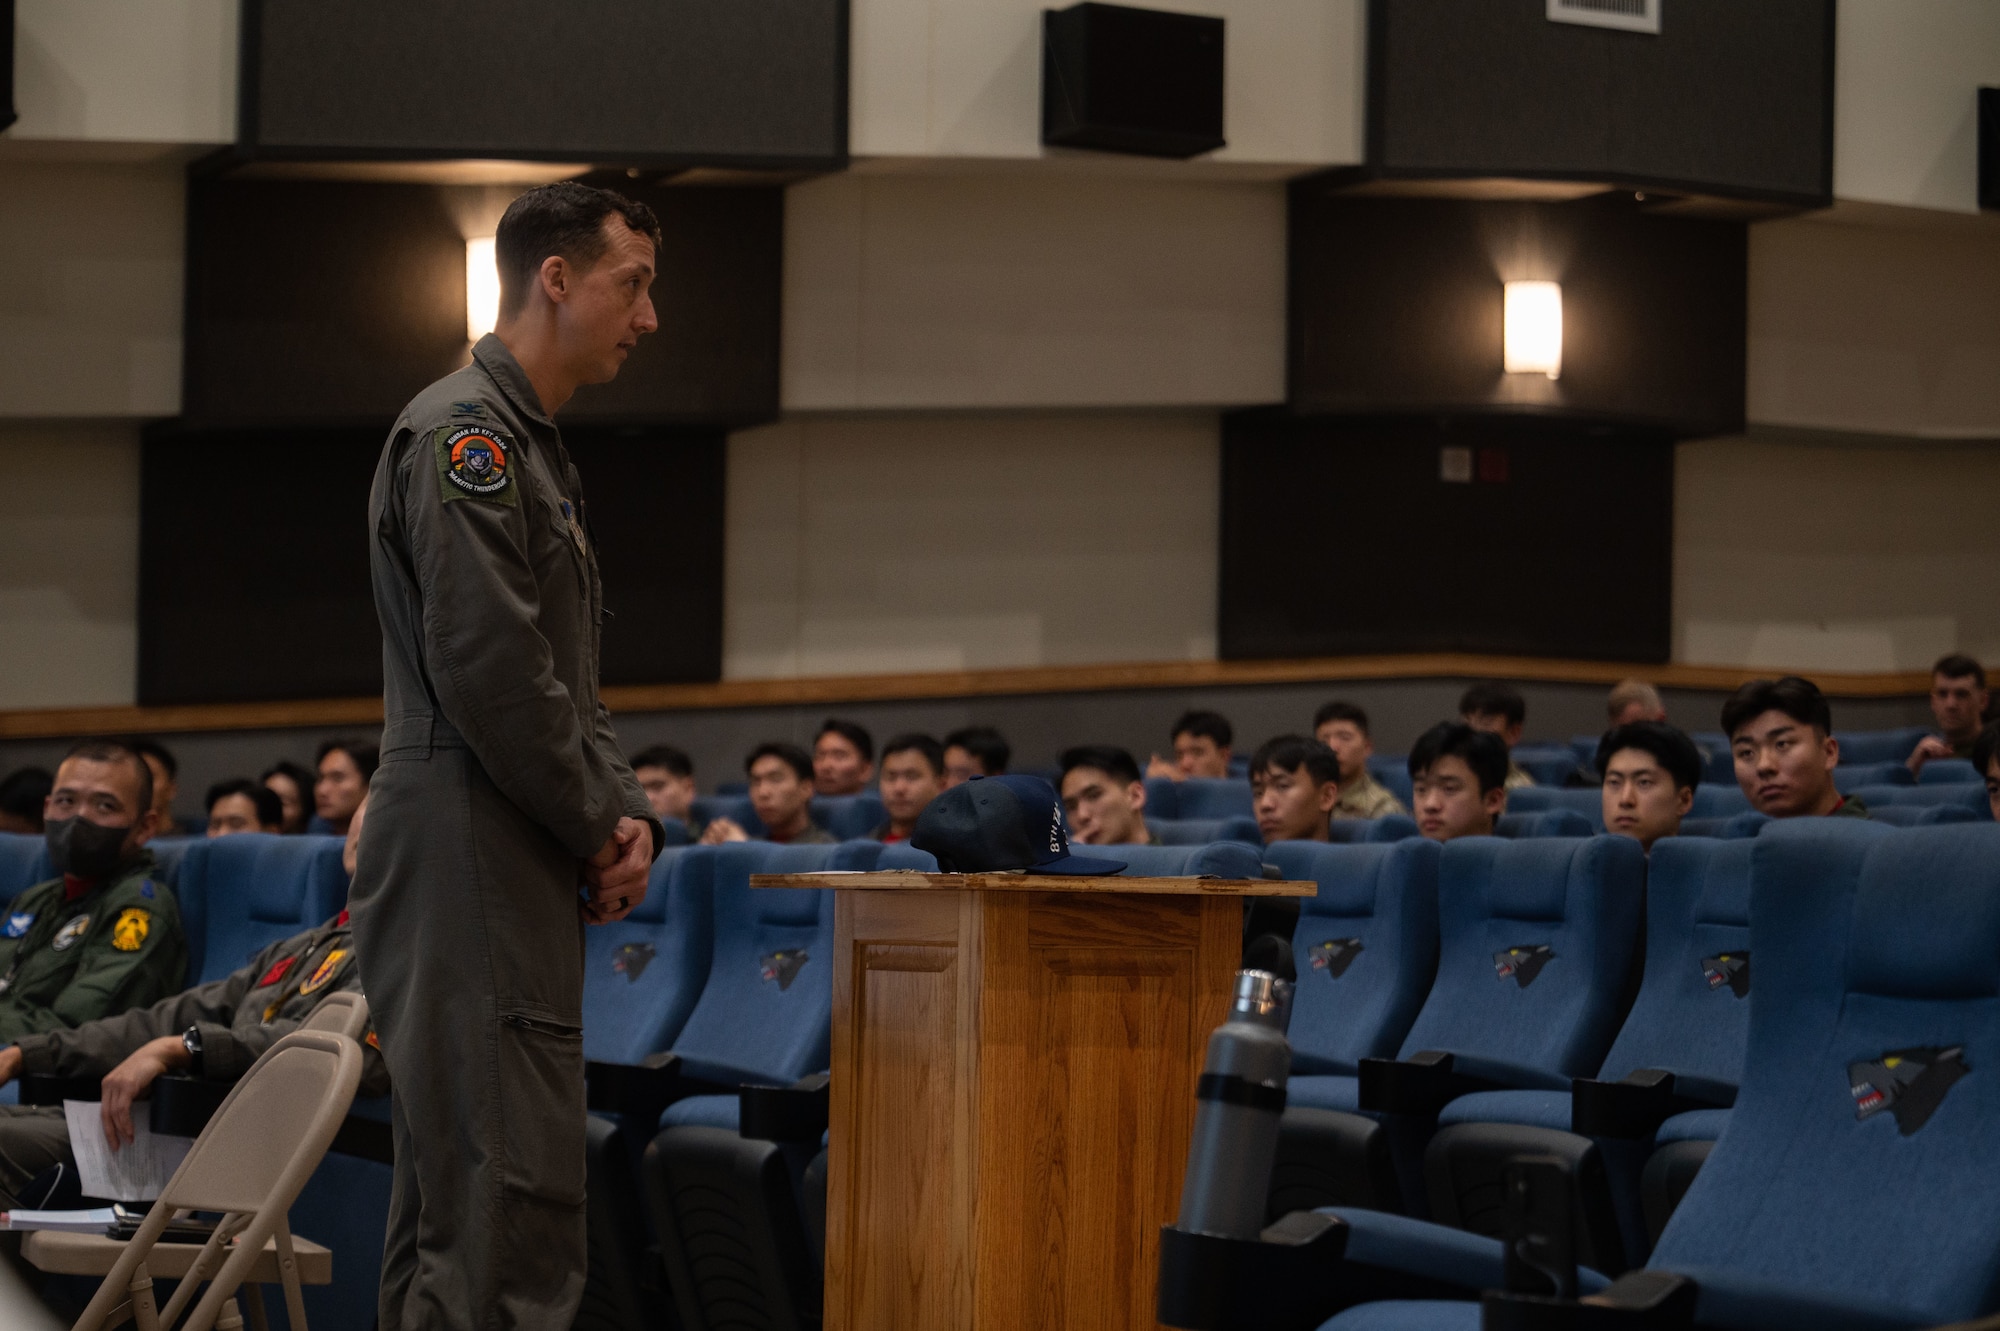 U.S. Air Force Col. Michael G. McCarthy, 8th Operation Group commander, delivers opening remarks at a welcoming briefing before the start of Korea Flying Training 24 at Kunsan Air Base, Republic of Korea